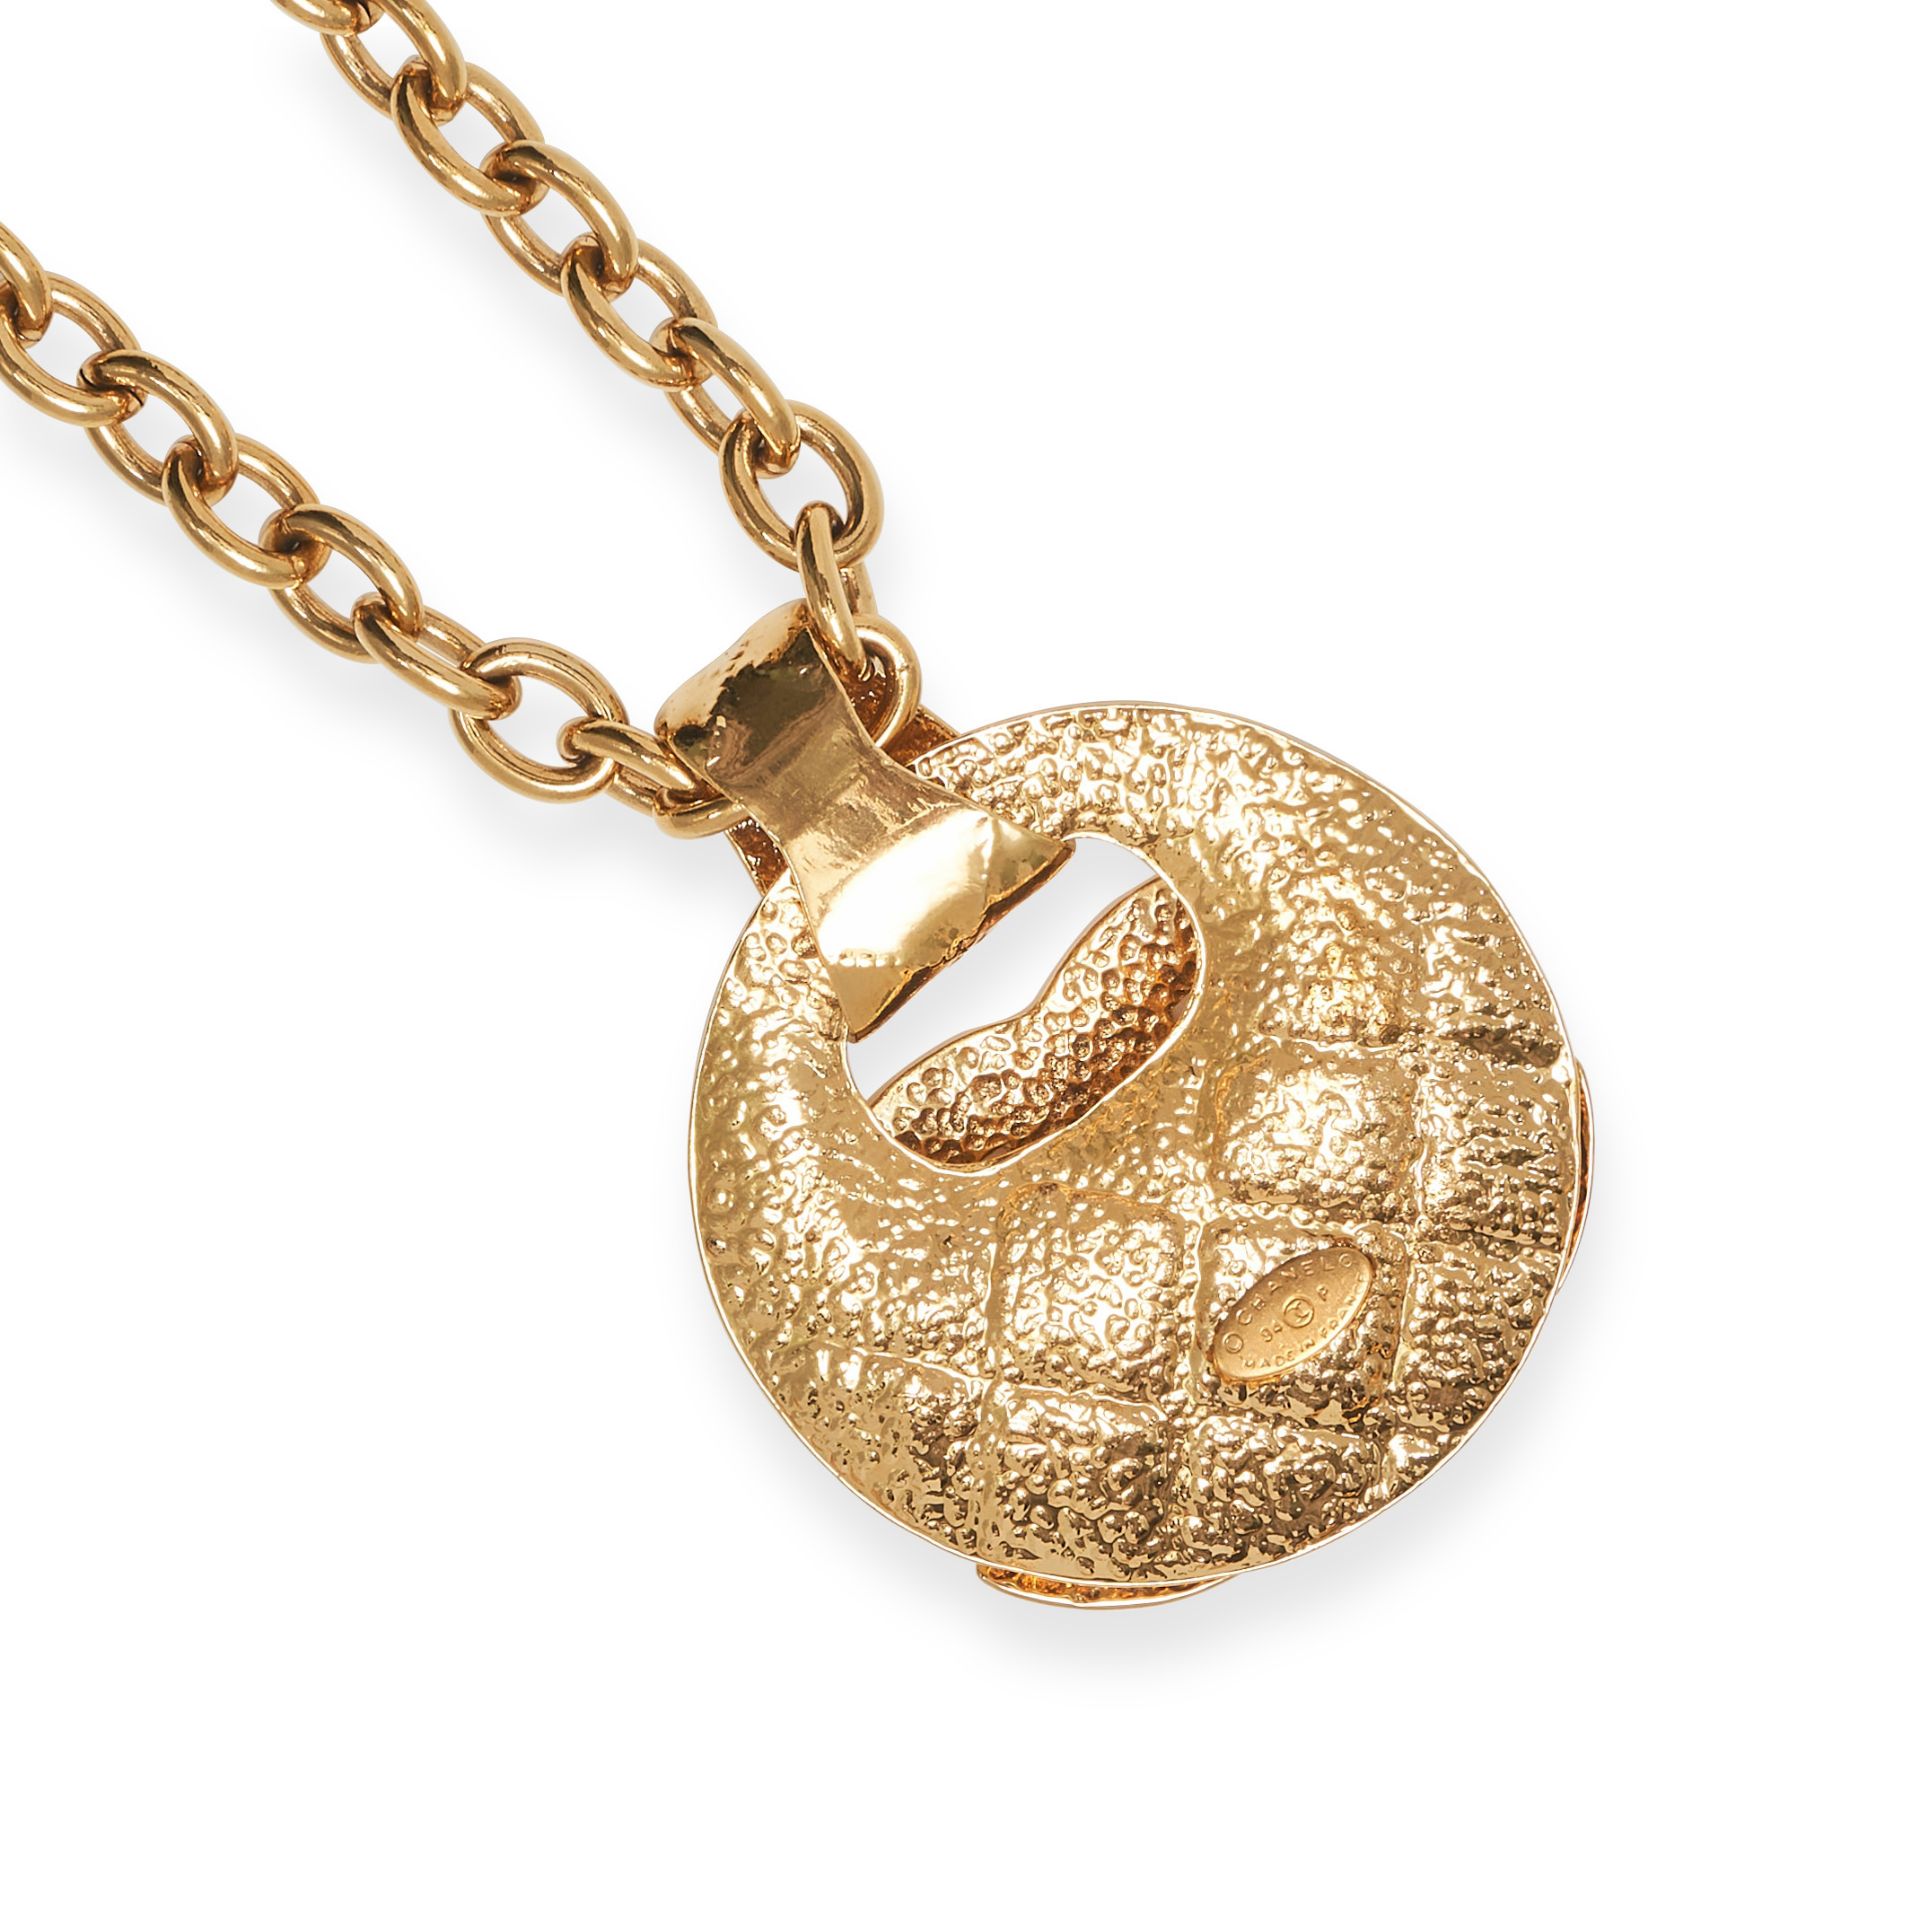 CHANEL VINTAGE PENDANT AND CHAIN - Image 3 of 3